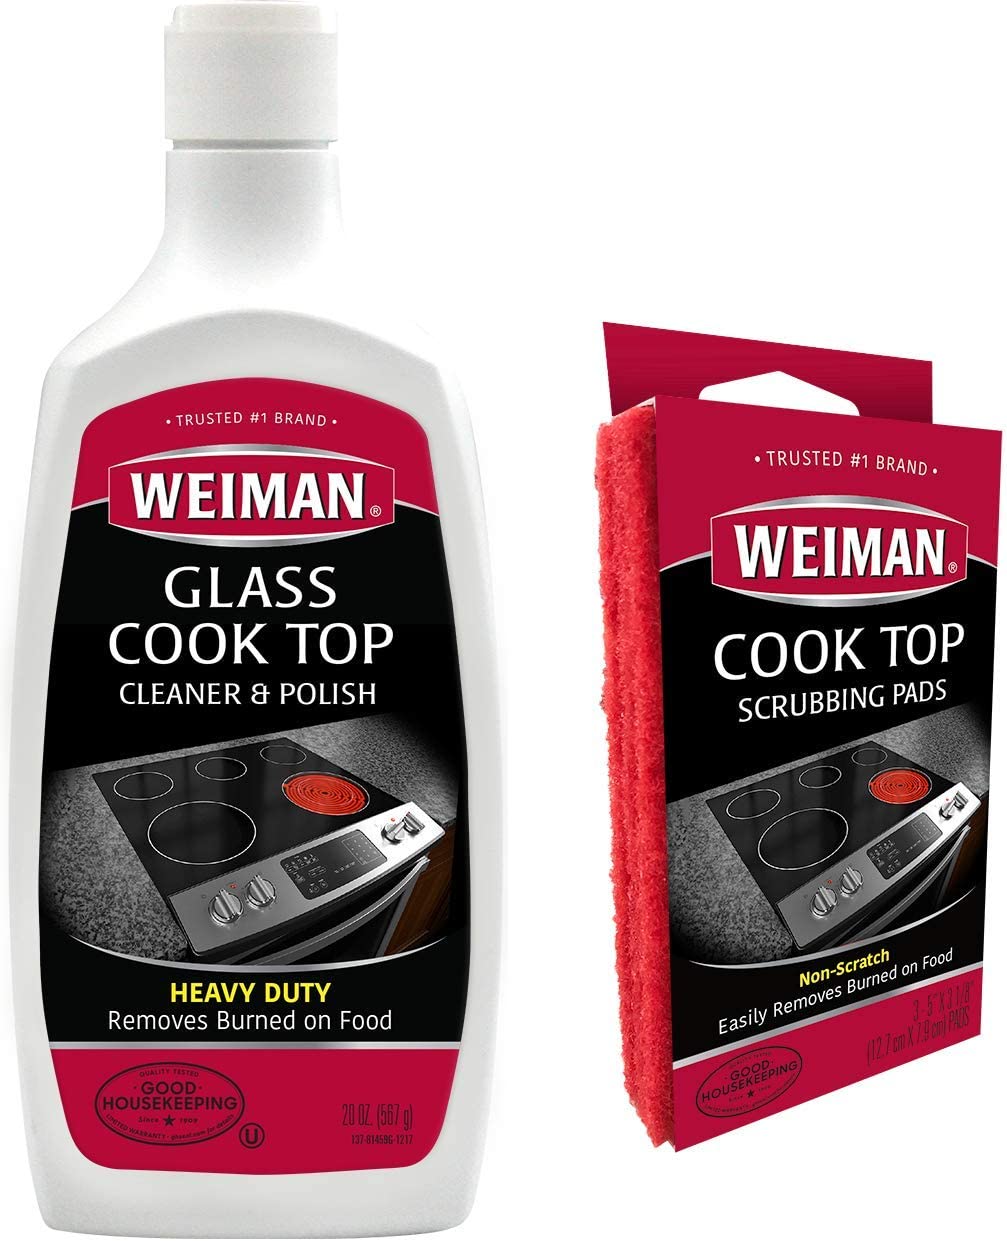 Weiman Ceramic and Glass Cooktop Cleaner and Polish - 20 Ounce 3 Pads - Heavy Duty Cooktop Scrubbing Pads - Shines and Protects Glass and Ceramic Smooth Top Ranges with its Gentle Formula